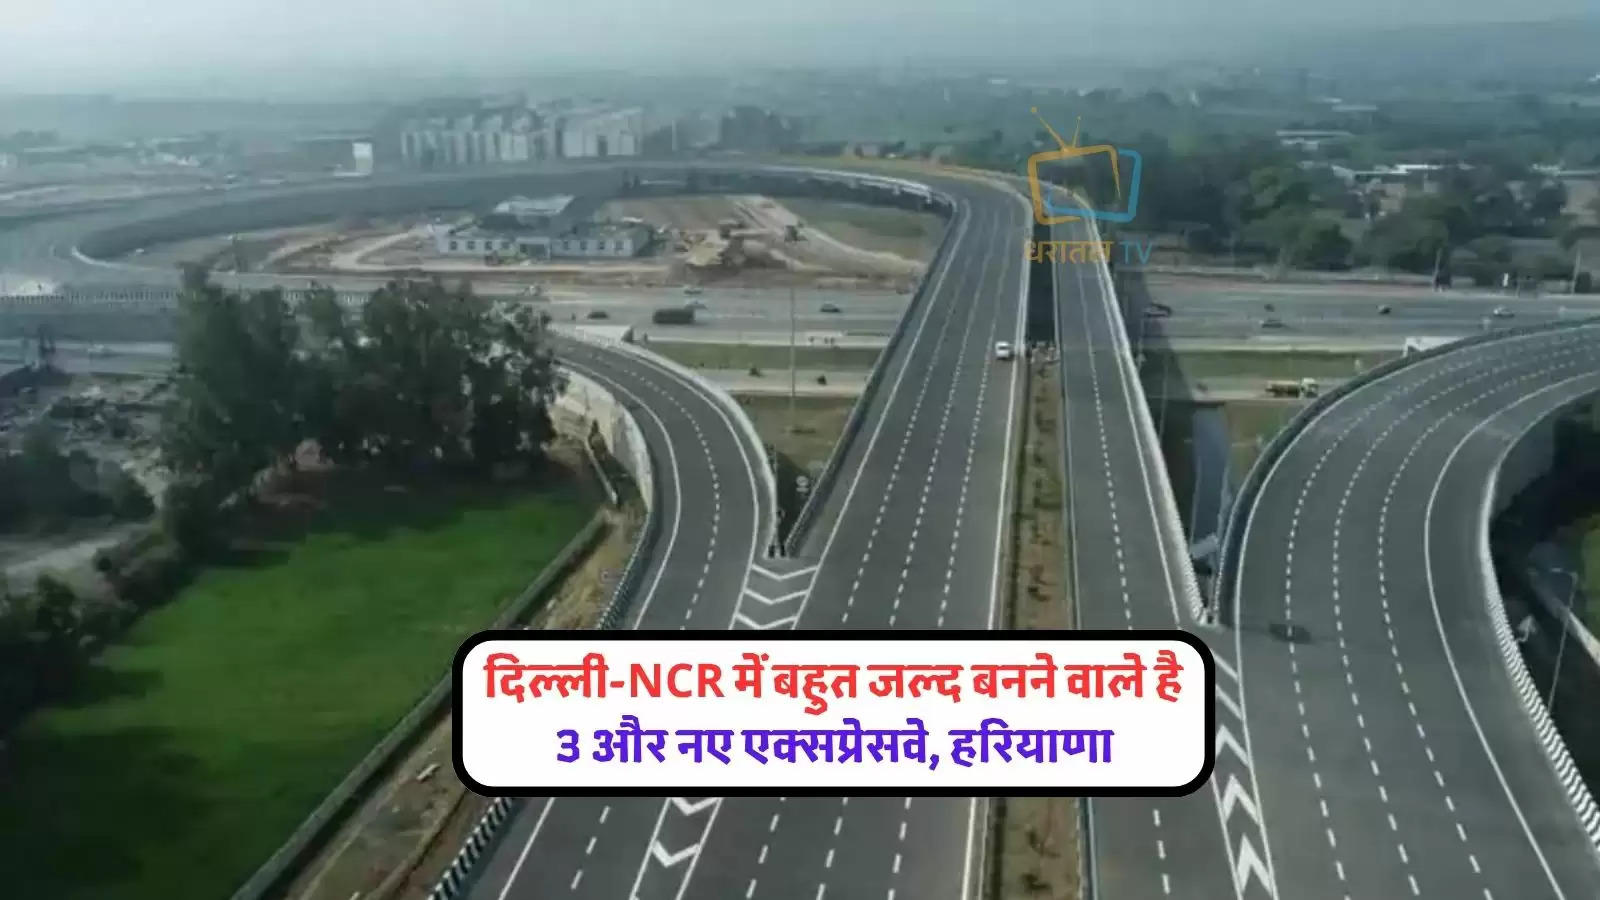 three-more-new-expressways-will-be-built-in-delhi-ncr-till-2028-it-will-be-easier-to-reach-up-haryana-rajasthan-and-punjab-nhai-modi-governme